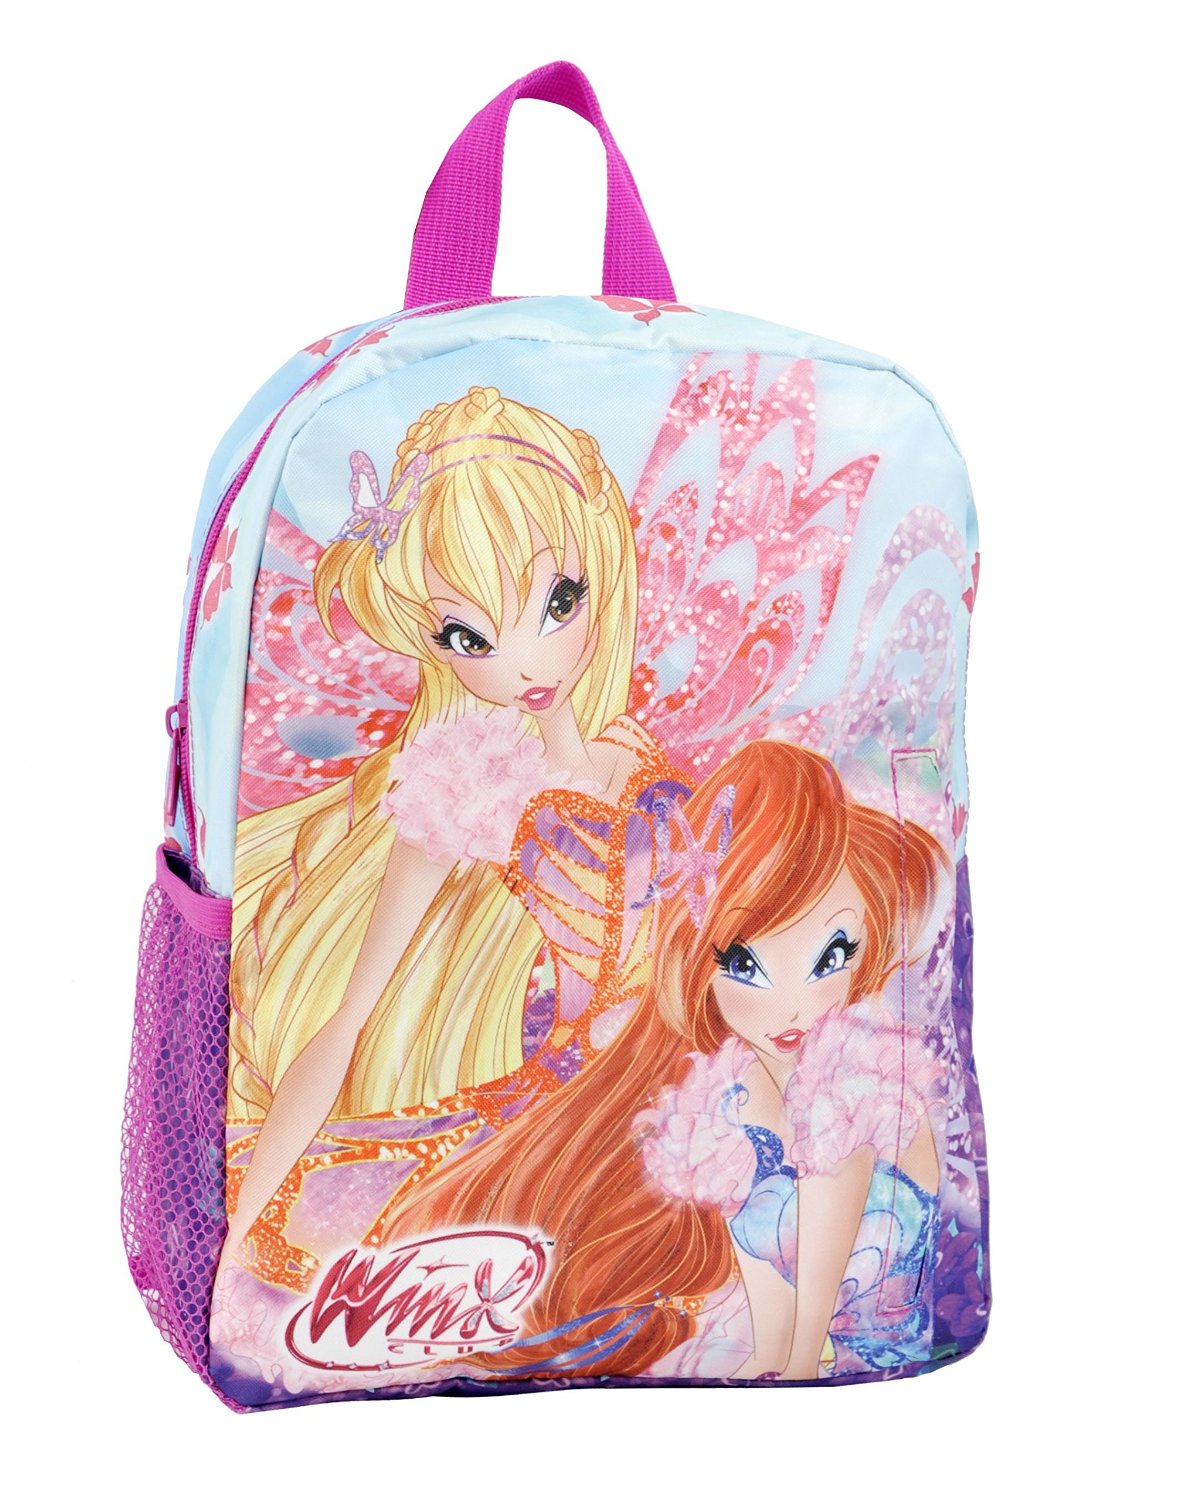 Winx Club Butterflix Backpacks & Bags Collection 2016 - Winx Club All